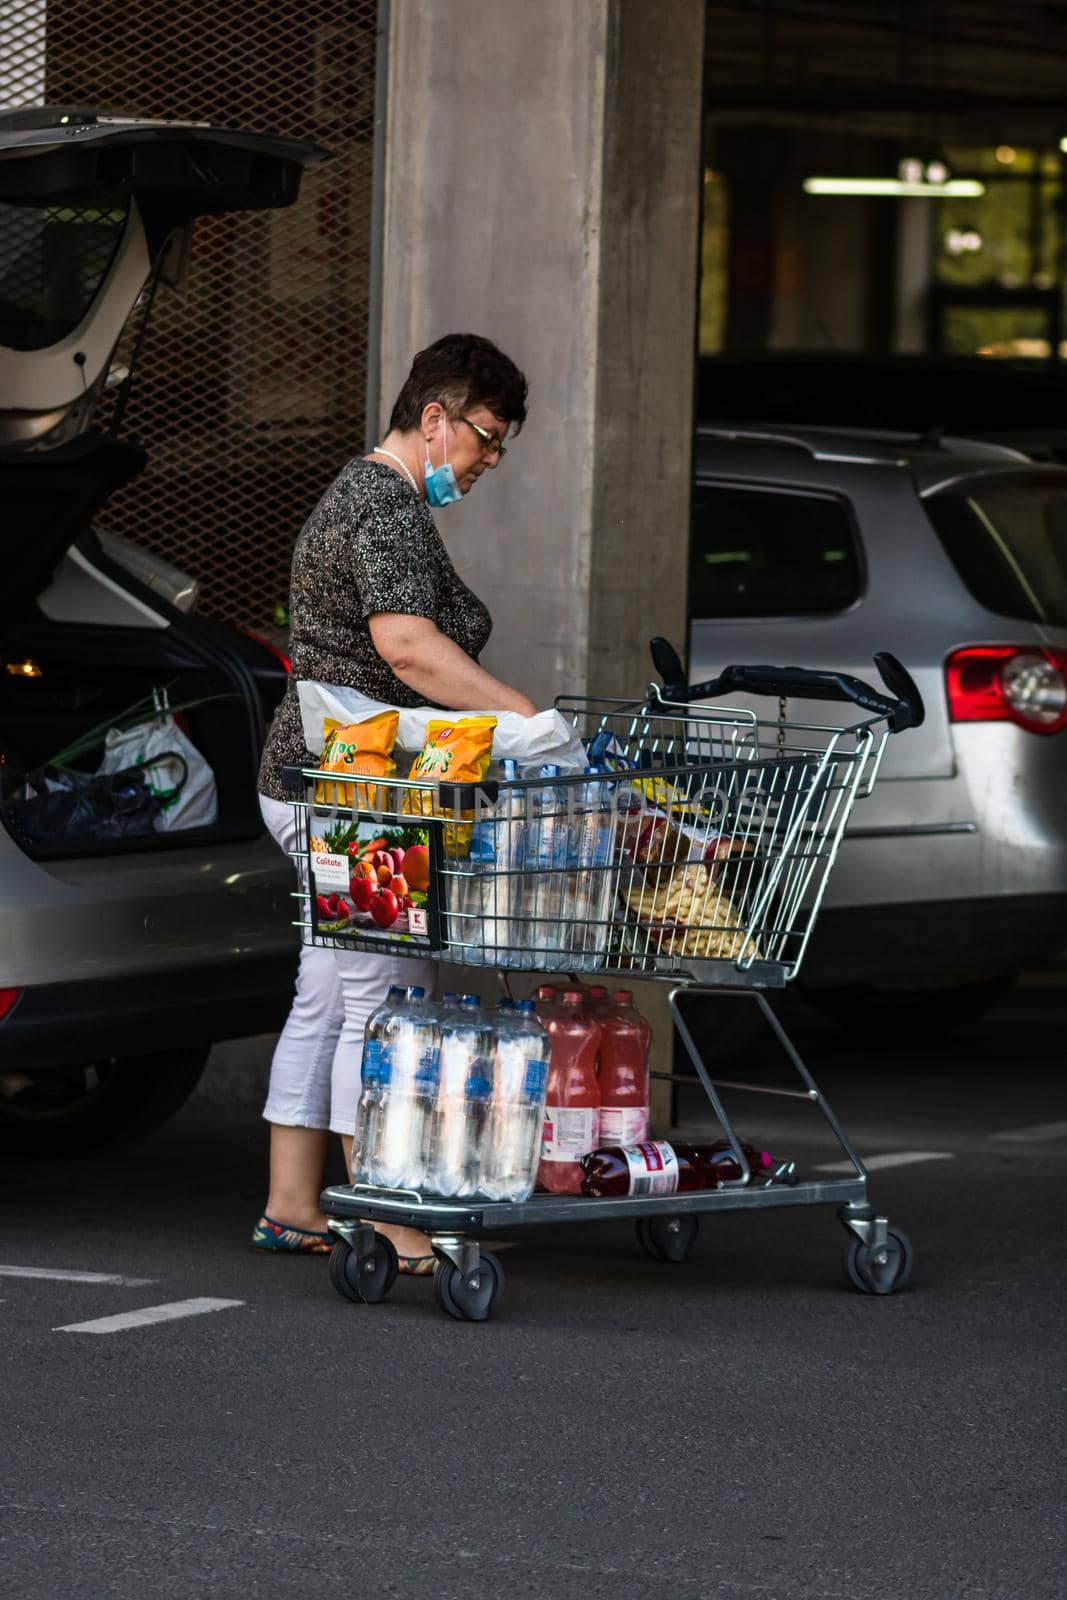 Woman wearing surgical mask with shopping cart full of goods, putting groceries in car trunk. Bucharest, Romania, 2020 by vladispas